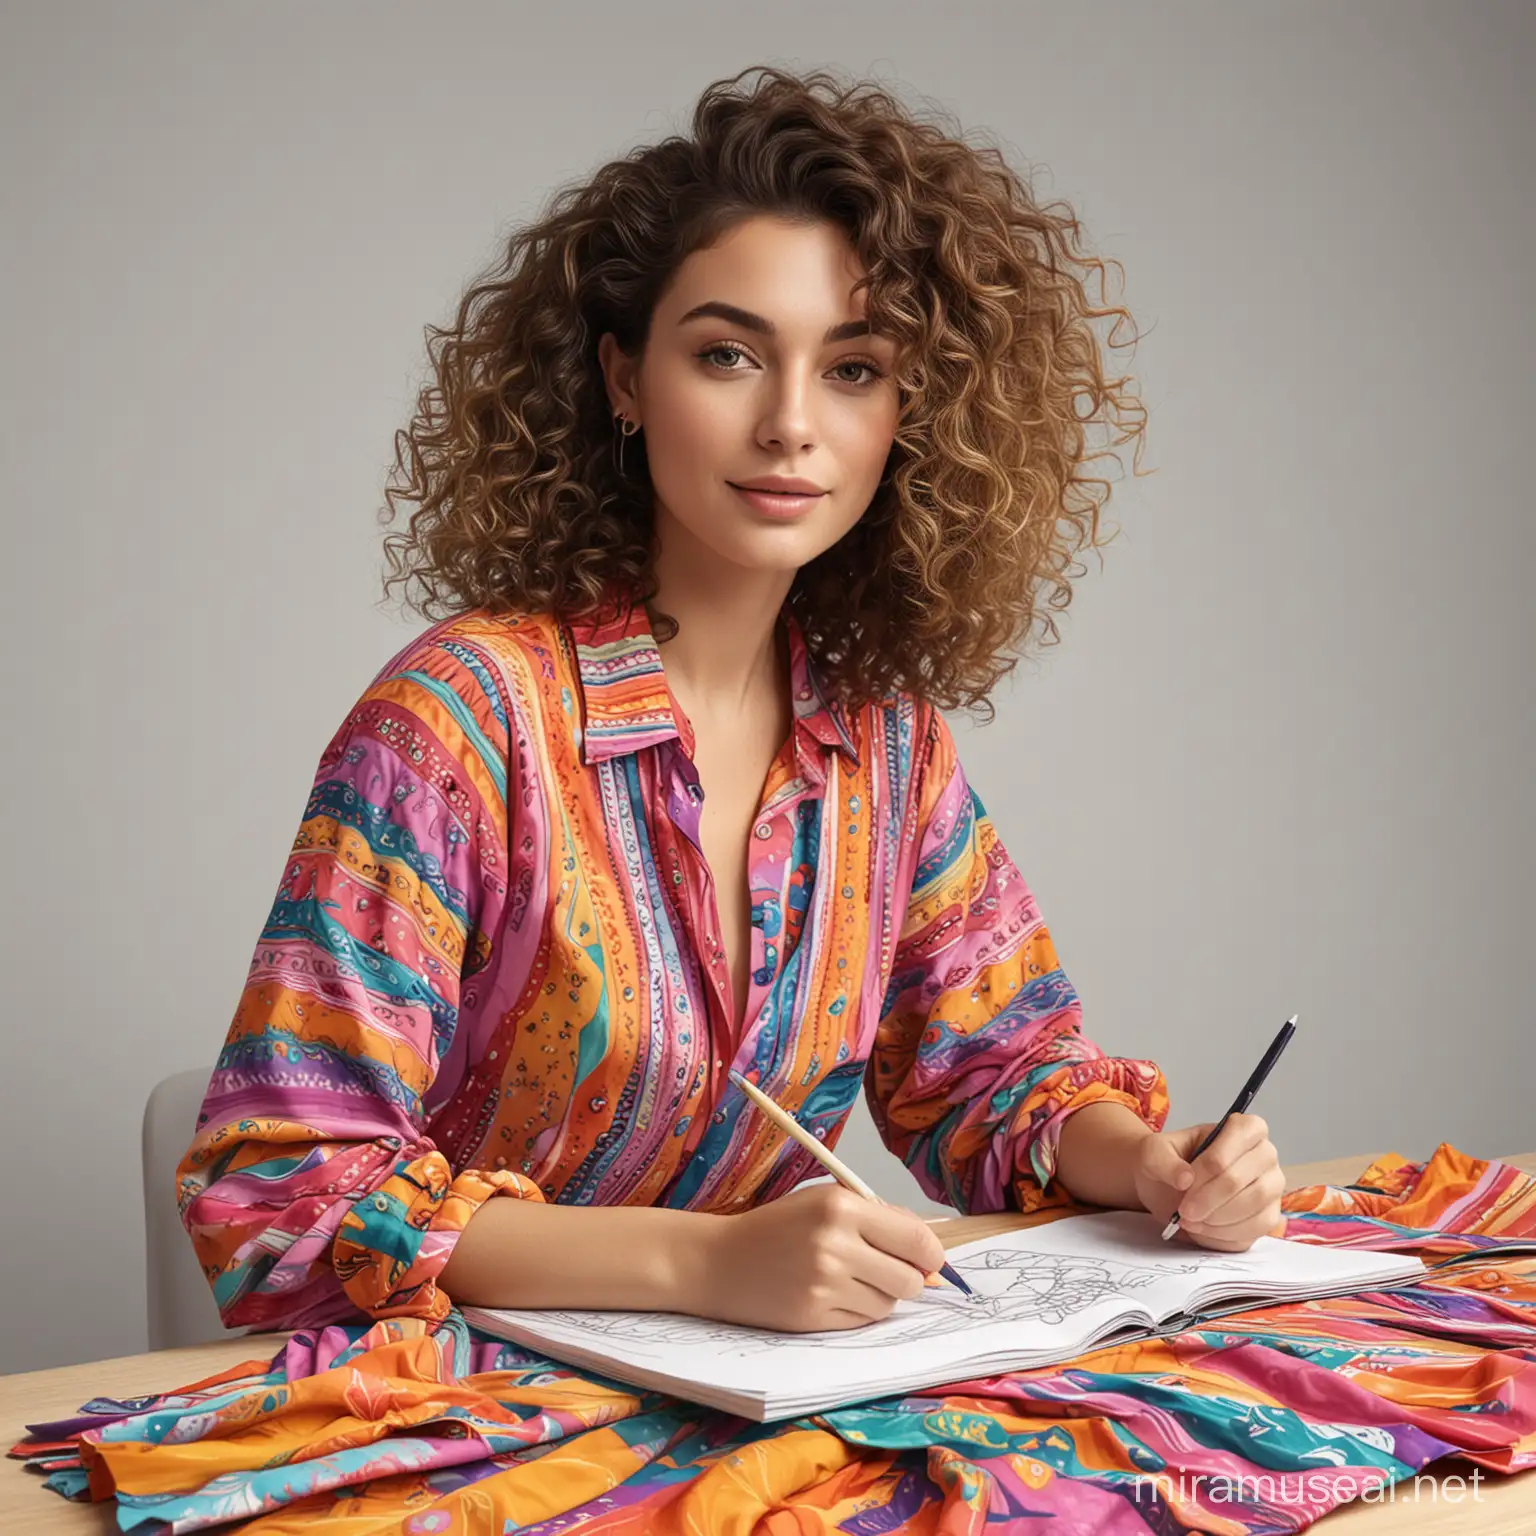 Creative Woman with Wavy Hair Drawing Digitally in Vibrant Attire